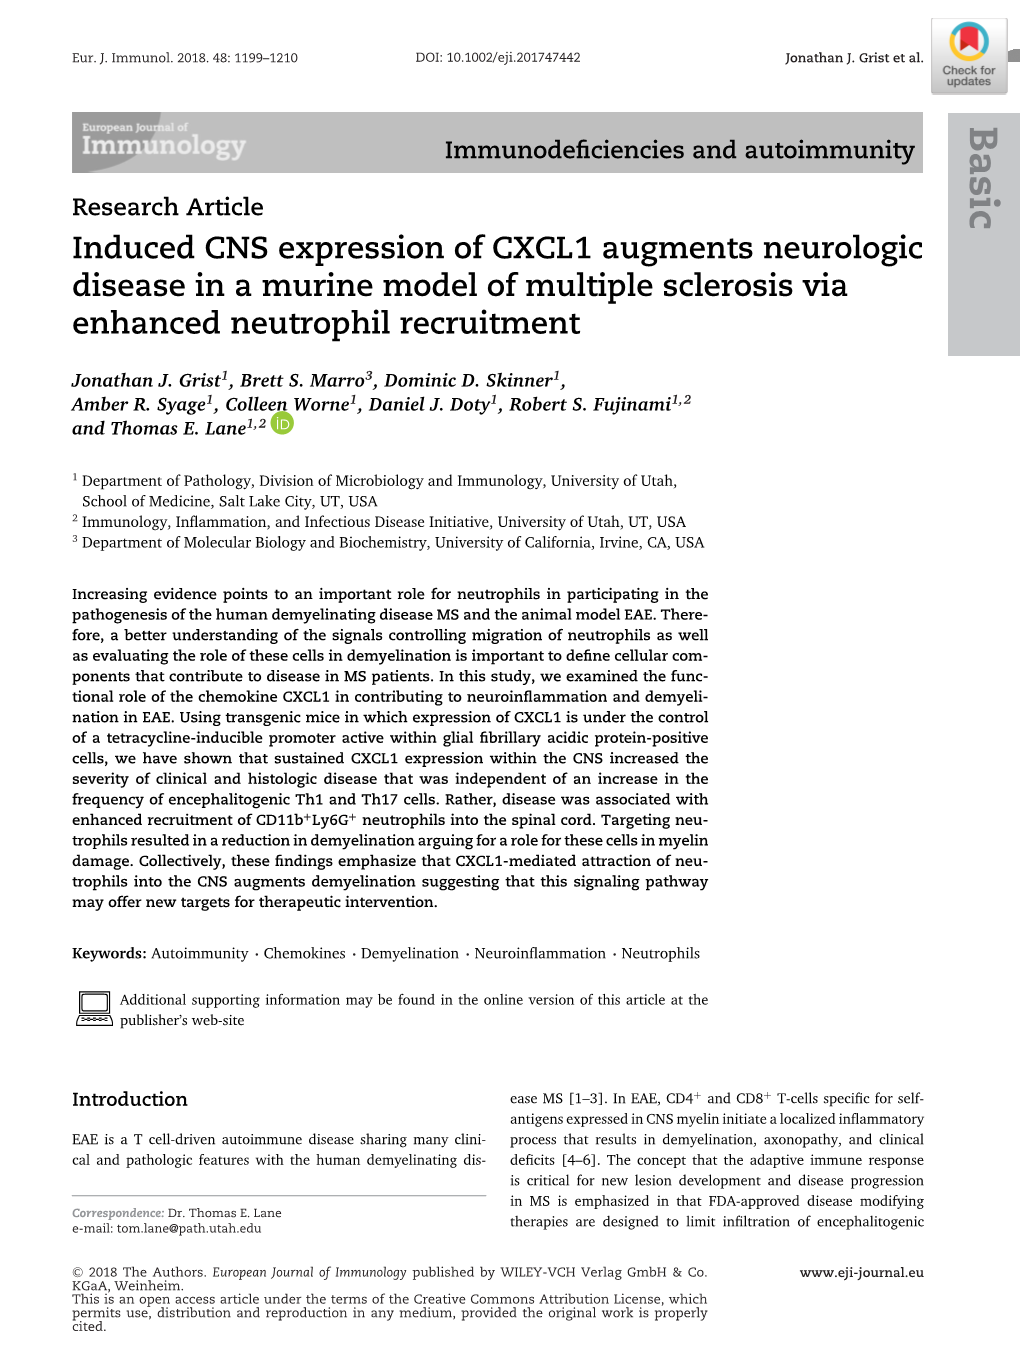 Induced CNS Expression of CXCL1 Augments Neurologic Disease in a Murine Model of Multiple Sclerosis Via Enhanced Neutrophil Recruitment